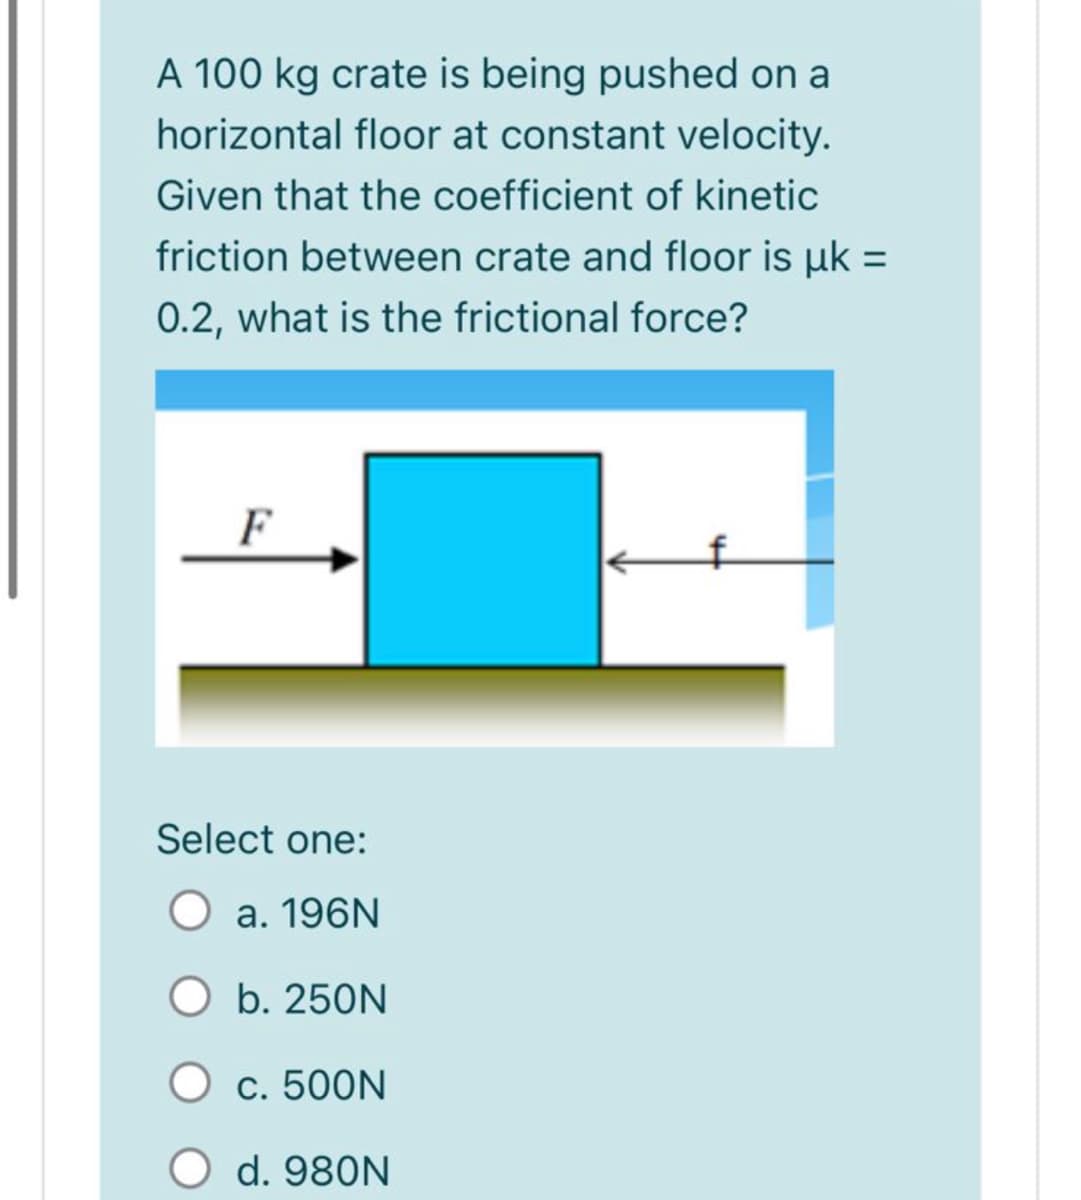 A 100 kg crate is being pushed on a
horizontal floor at constant velocity.
Given that the coefficient of kinetic
friction between crate and floor is uk =
0.2, what is the frictional force?
F
Select one:
a. 196N
O b. 250N
O c. 500N
d. 980N
